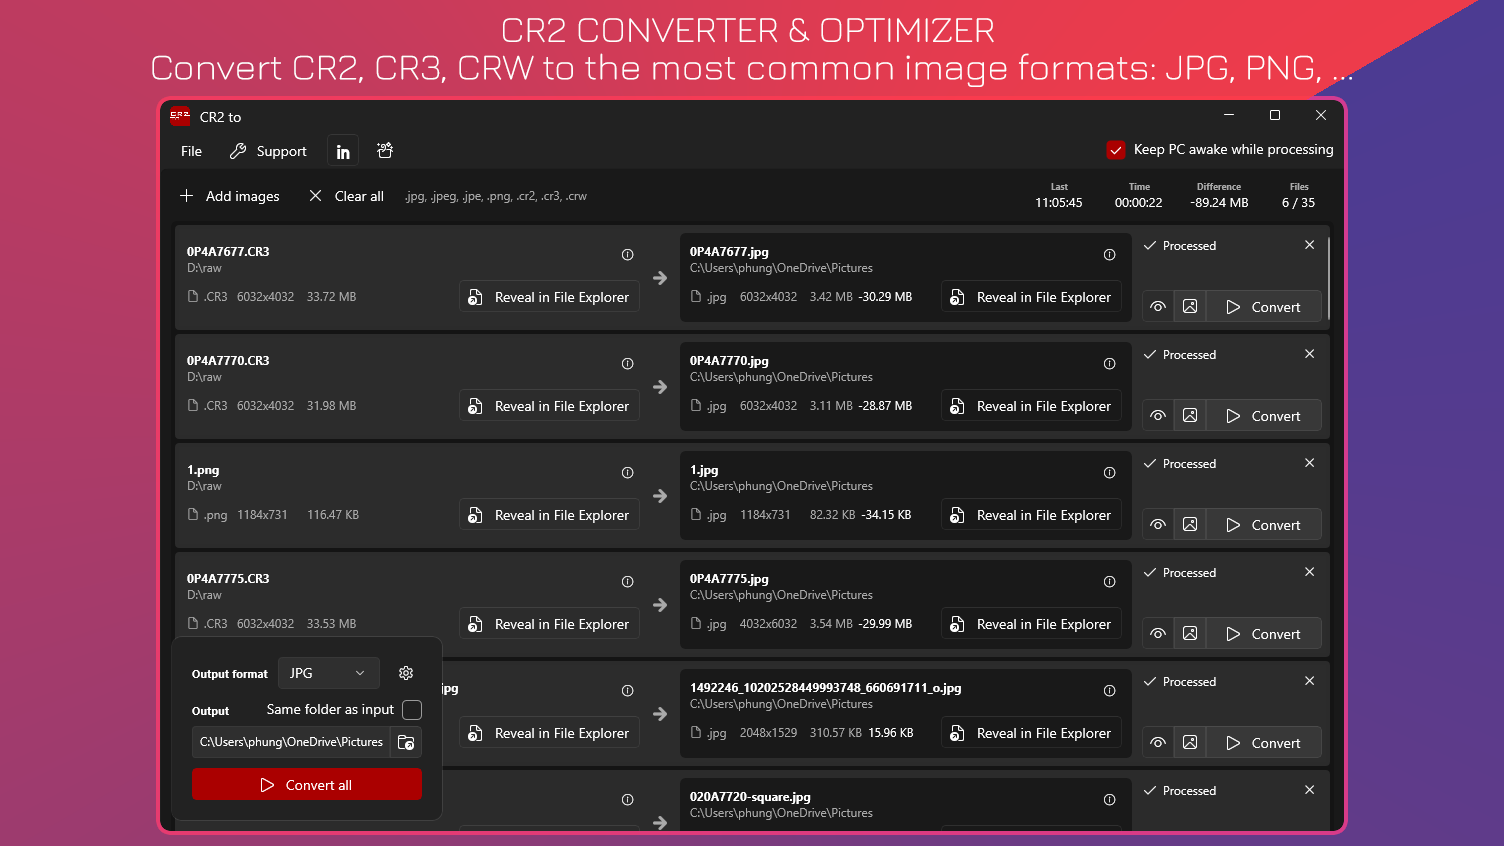 CR2 Converter & Optimizer - Convert CR2, CR3, CRW to the most common image formats: JPG, PNG, ...